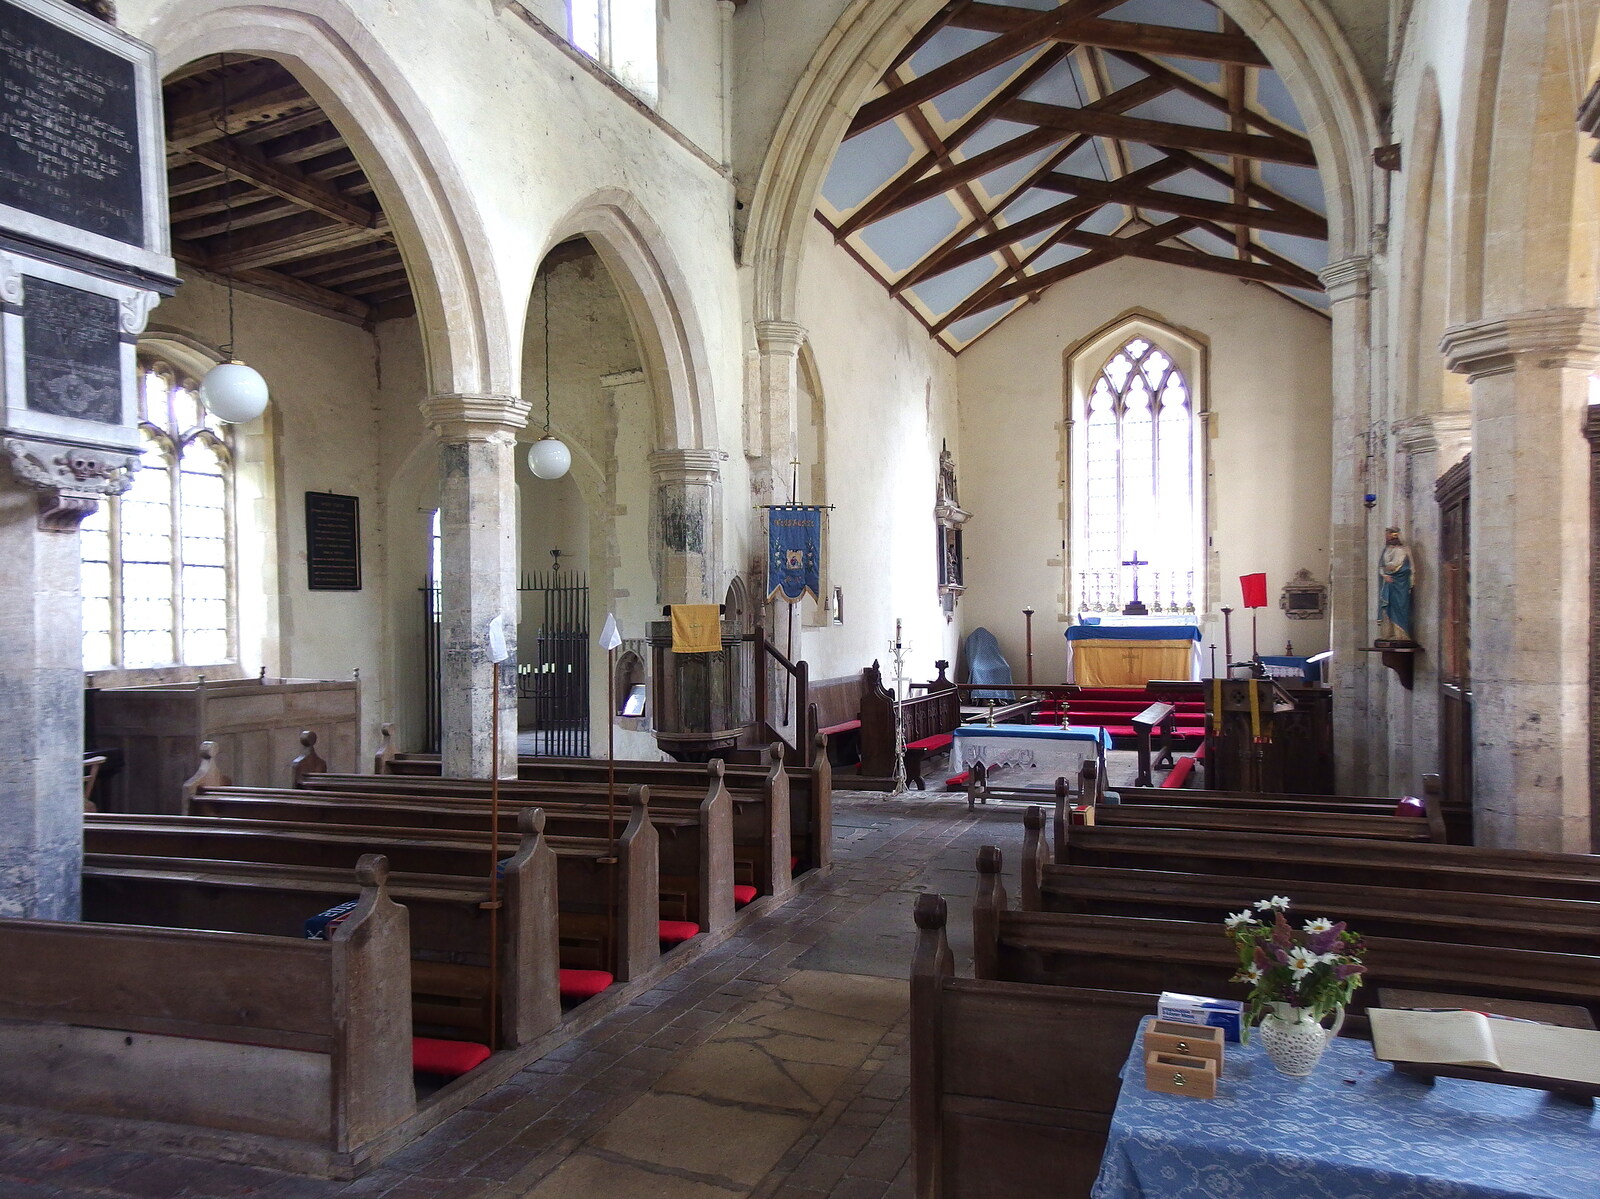 A view of the nave of St. Margaret Westhorpe from A Ride to Walsham Le Willows, Suffolk - 15th July 2022